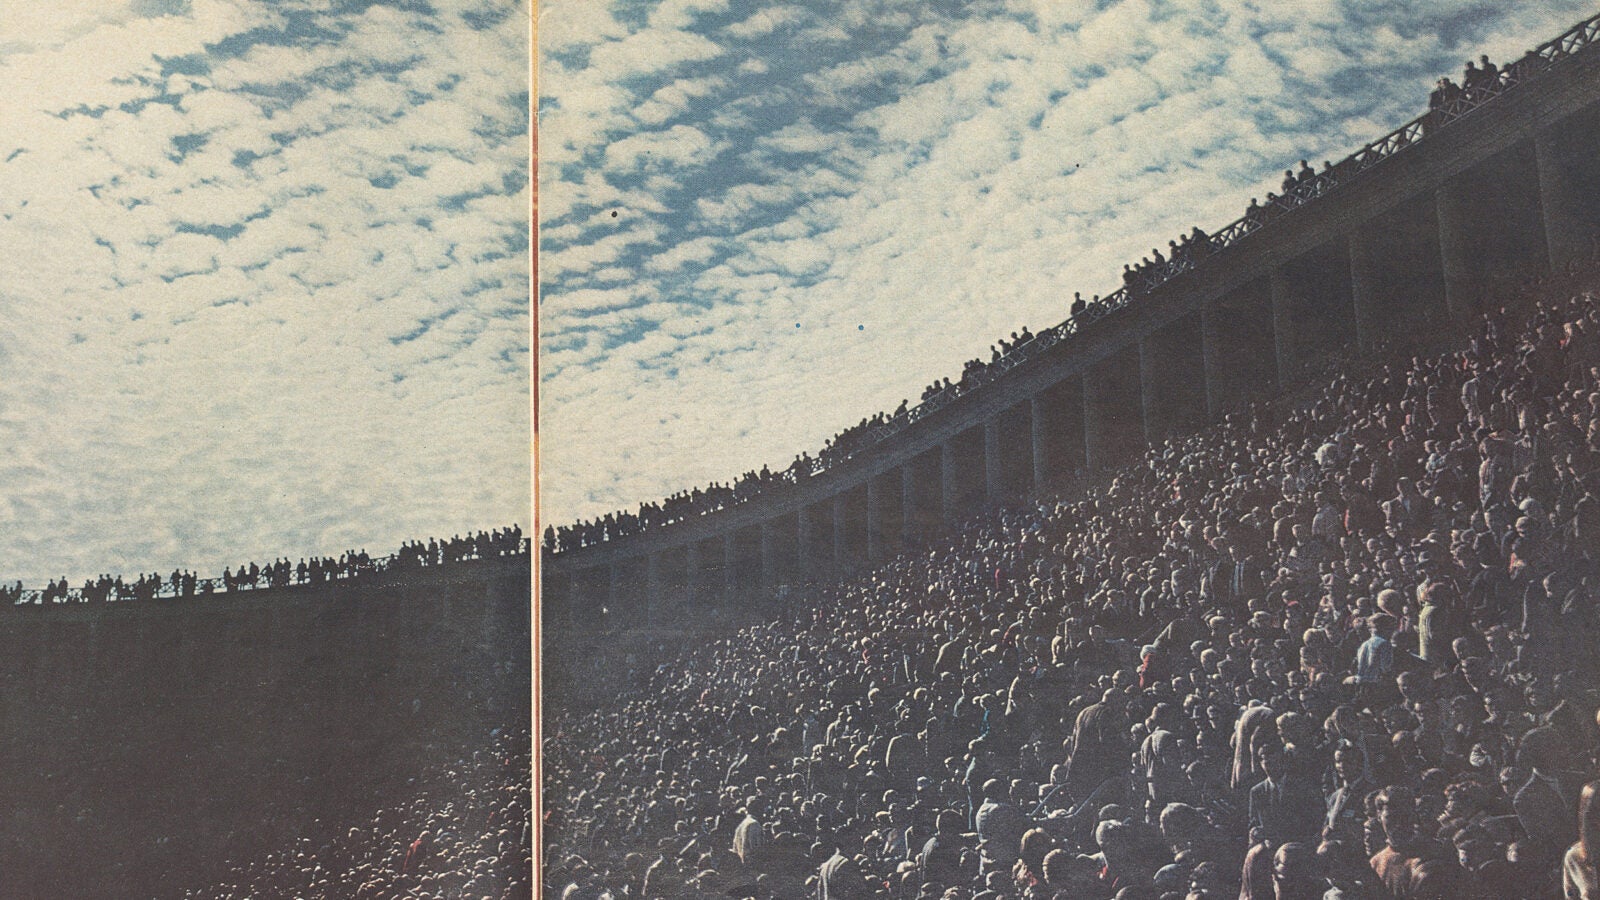 Students filled Harvard Stadium for a rally.